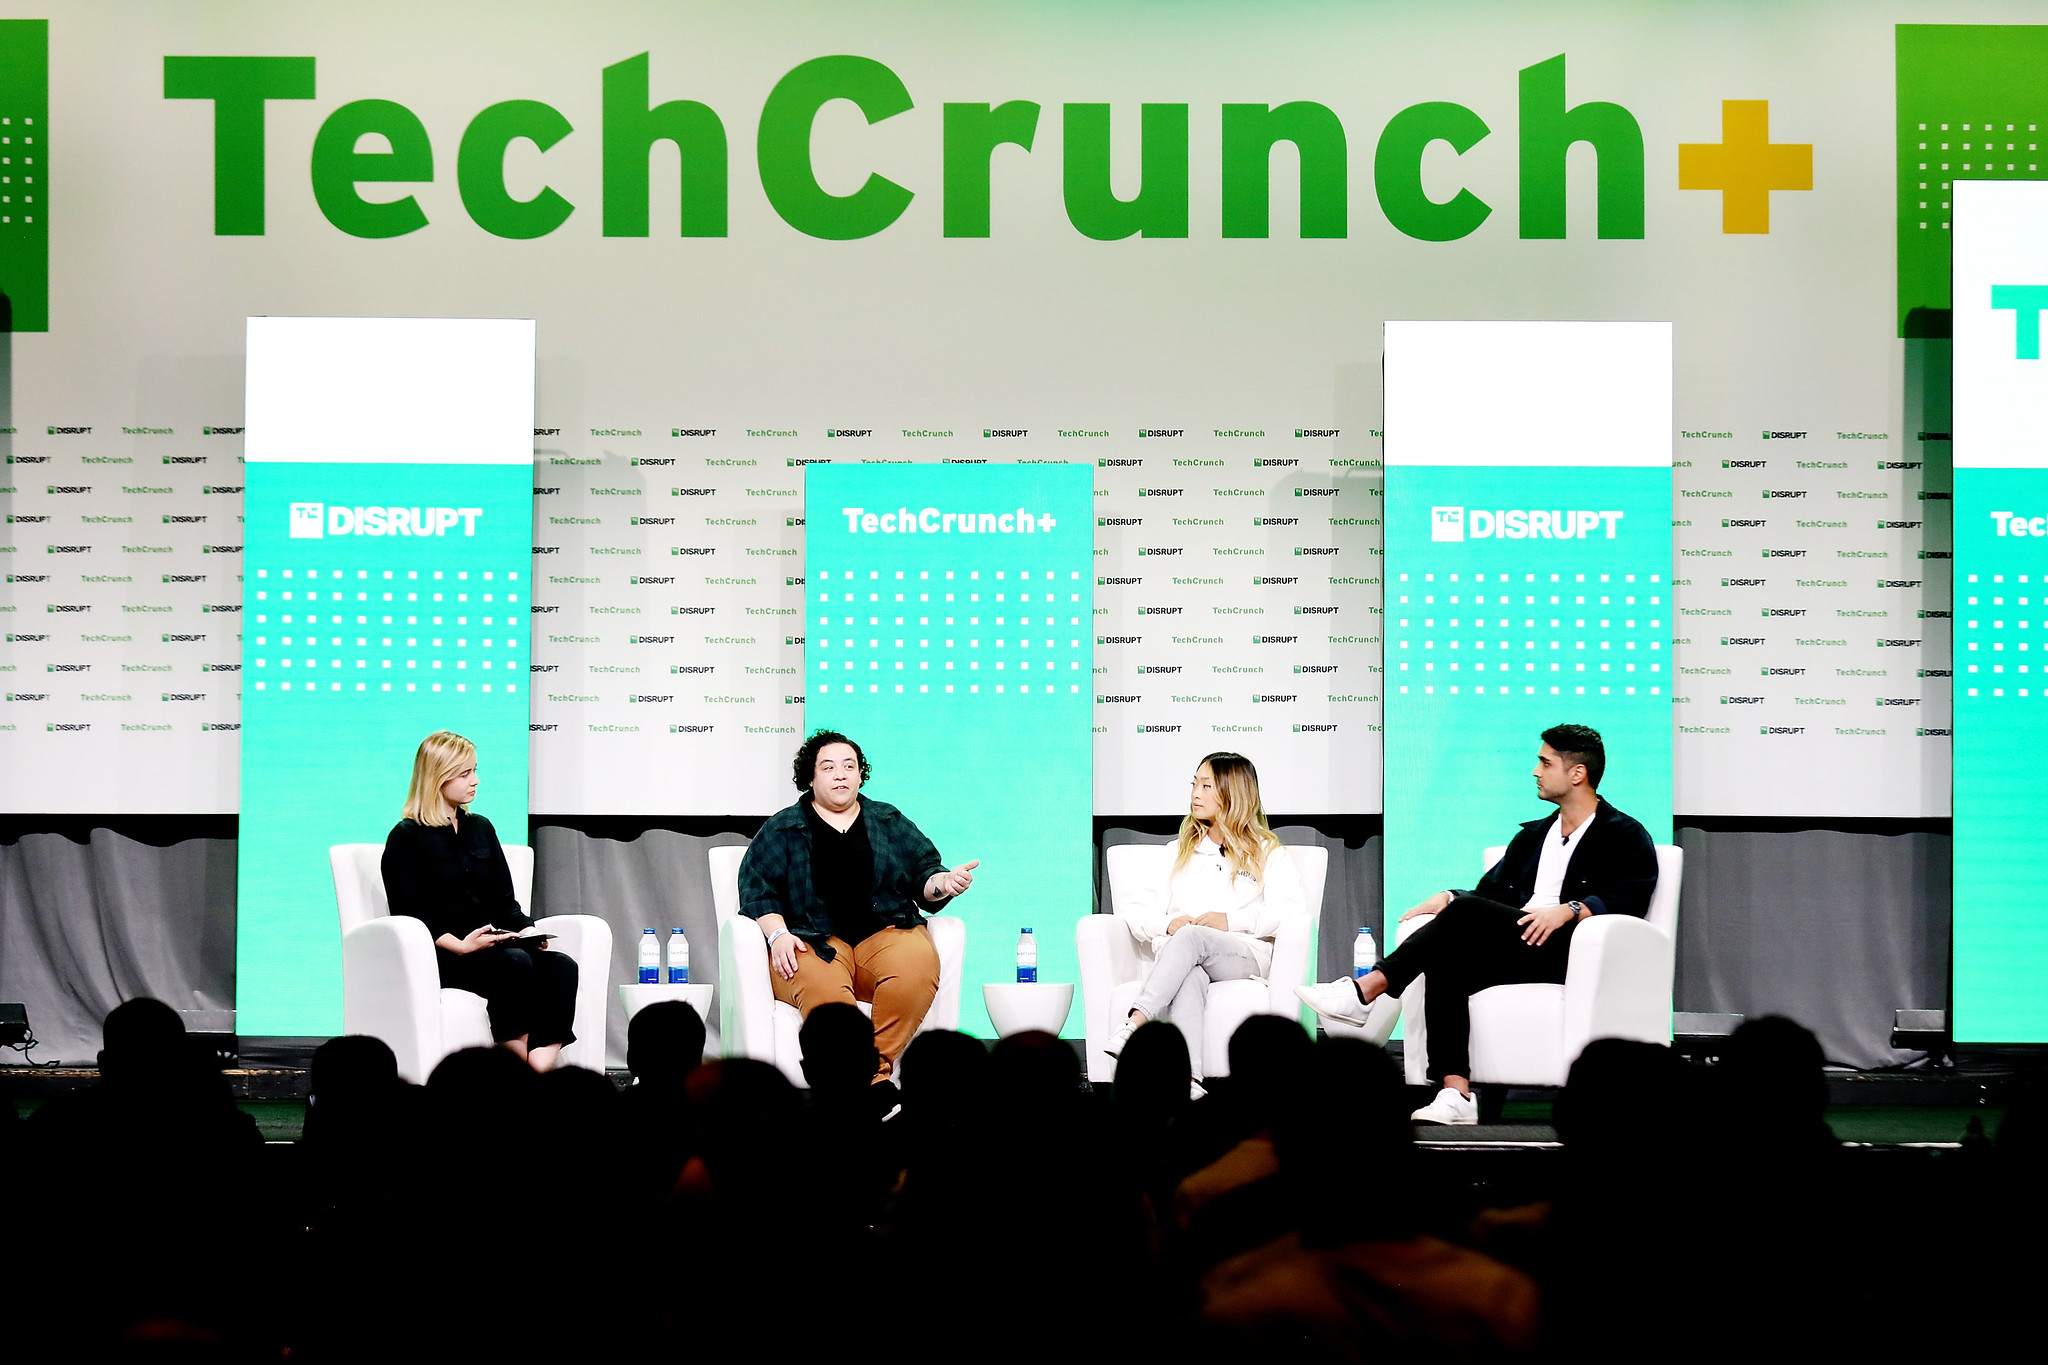 Rebecca Szkutak, senior writer at TechCrunch+;  Amanda DoAmaral, co-founder and CEO, Fiveable;  Sara Du, co-founder and CEO, Alloy Automation;  and Arman Hezarkhani, founder & CEO, Parthean speak onstage during TechCrunch Disrupt 2022.